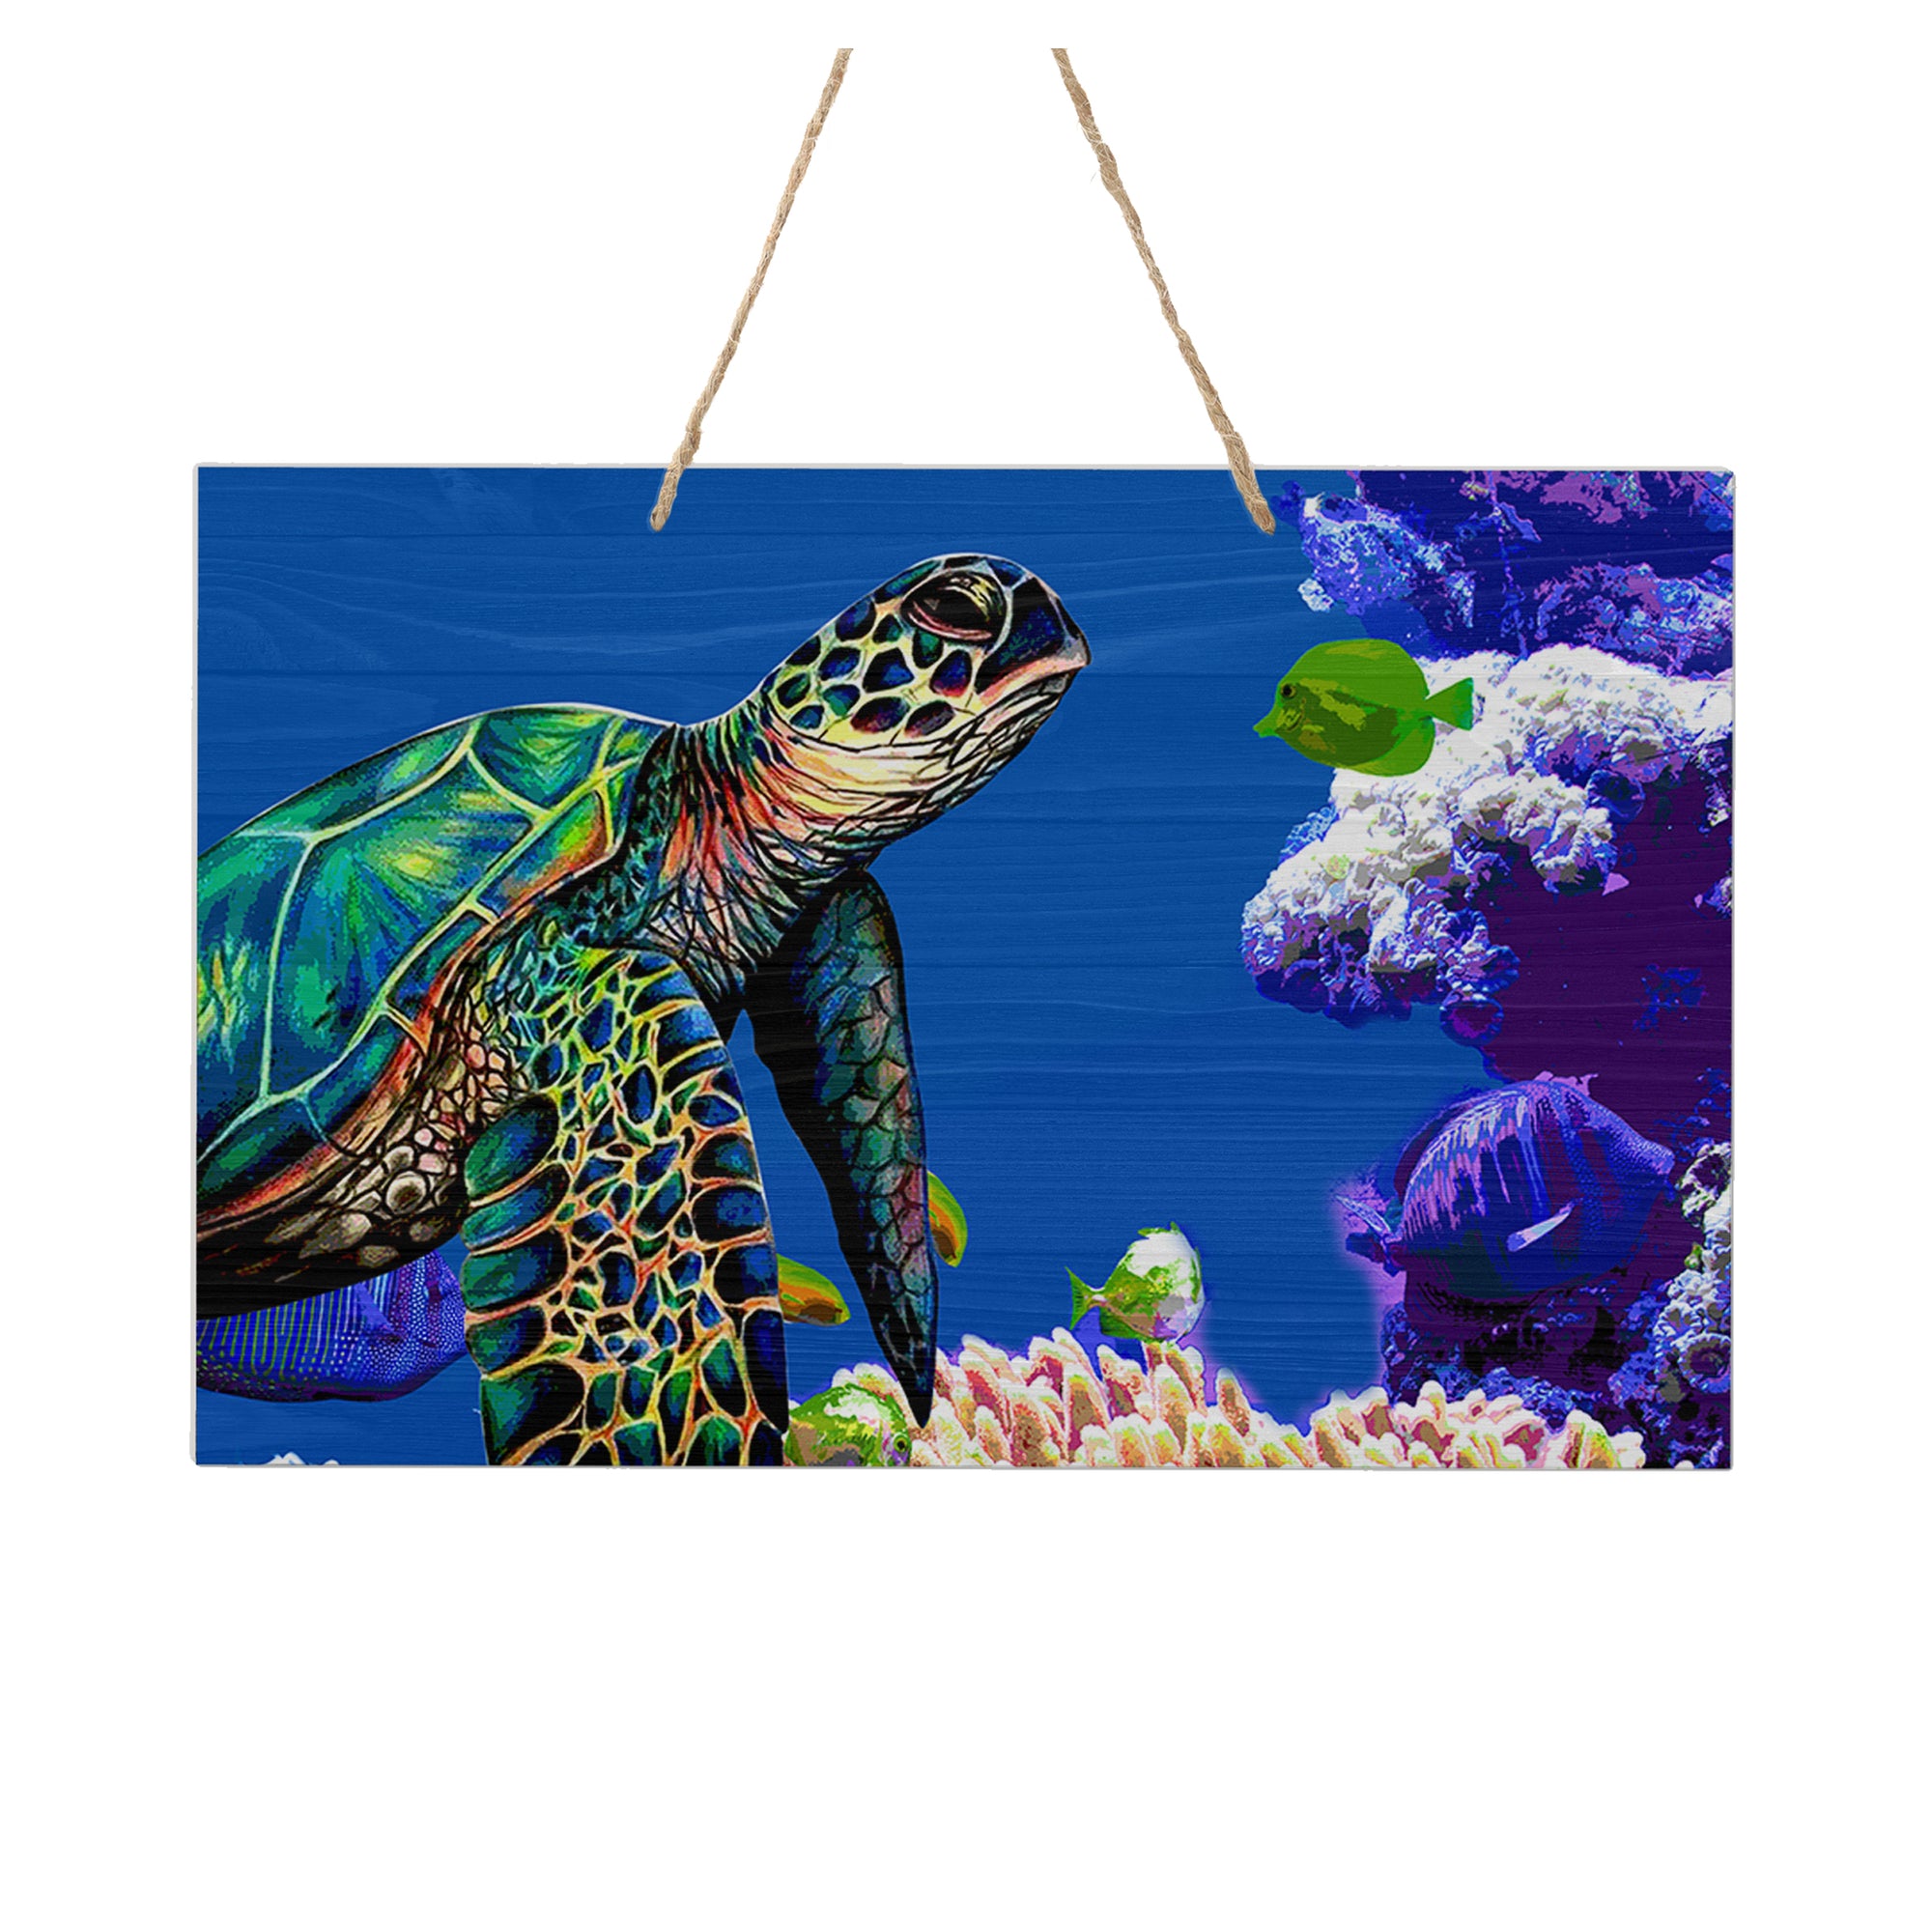 Lifesong Milestones Sea Turtle Art Rope Sign for Modern Wall Decoration 8x12in  Perfect gift ideas for a Newly-Wed Couple’s Housewarming Parties, parents, grandparents, Loved Ones, and friends.